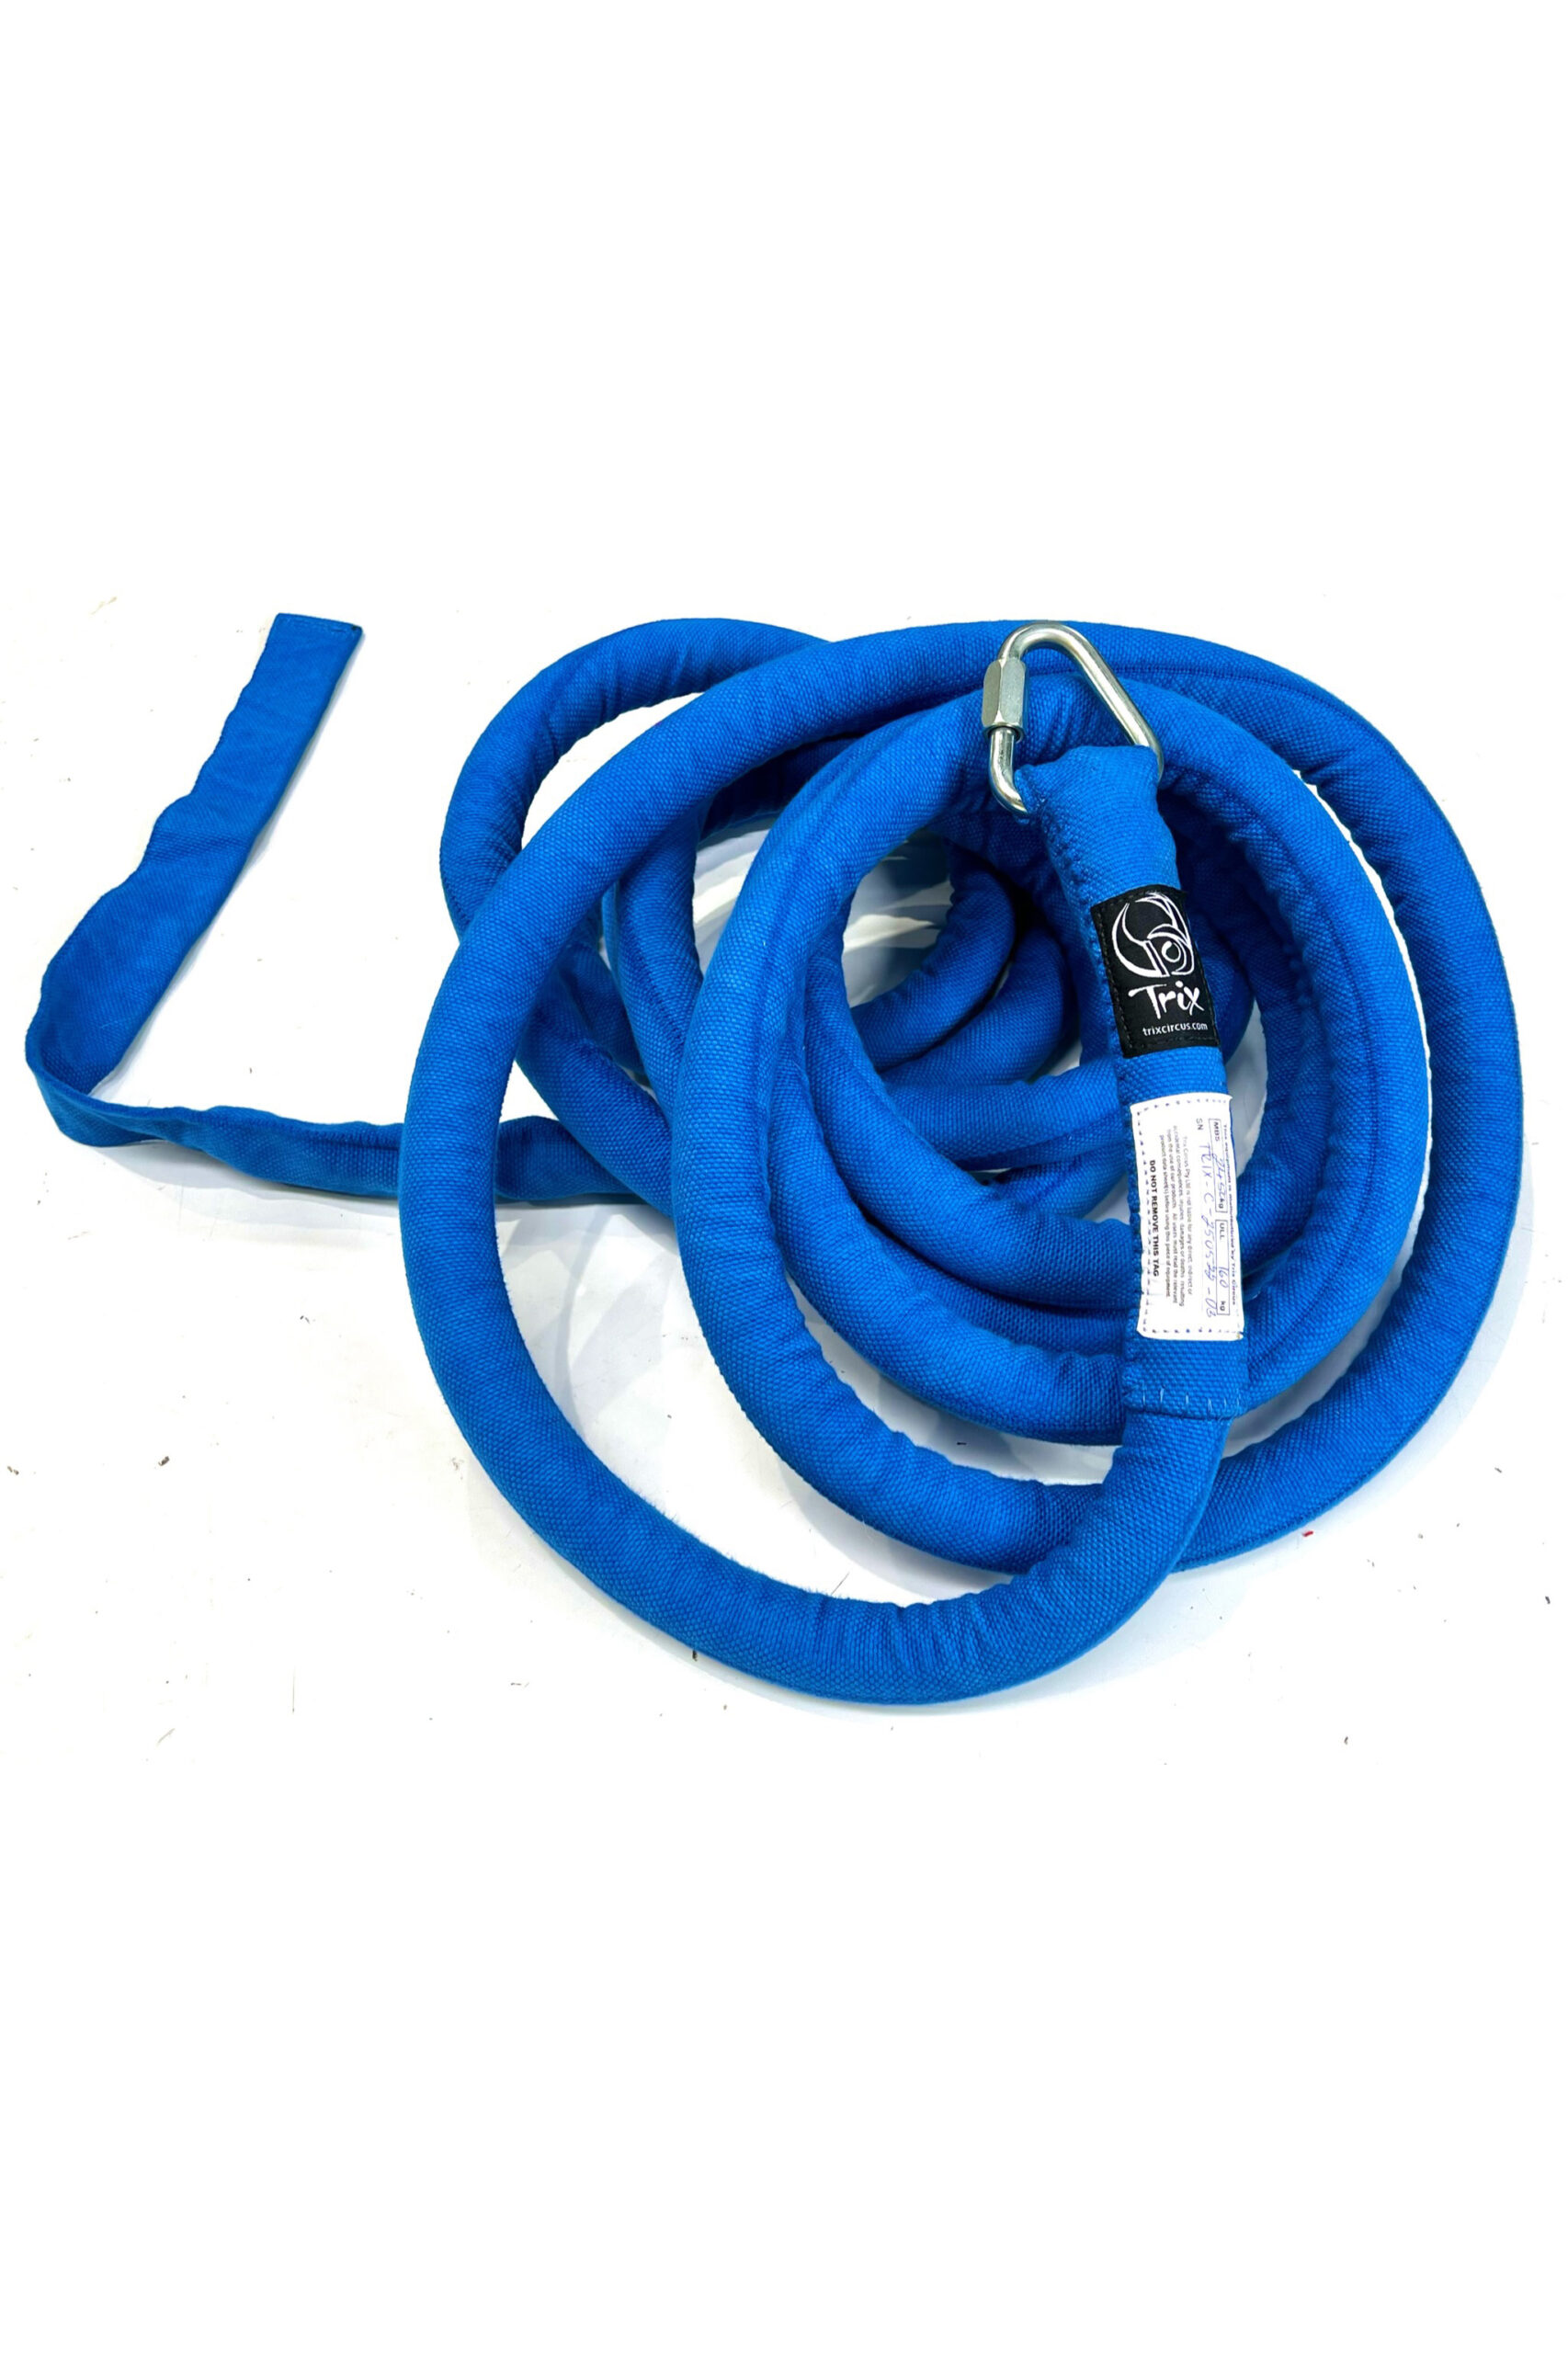 Corde Lisse - Aerial Rope - Trix Circus - Your Safety is Our Business